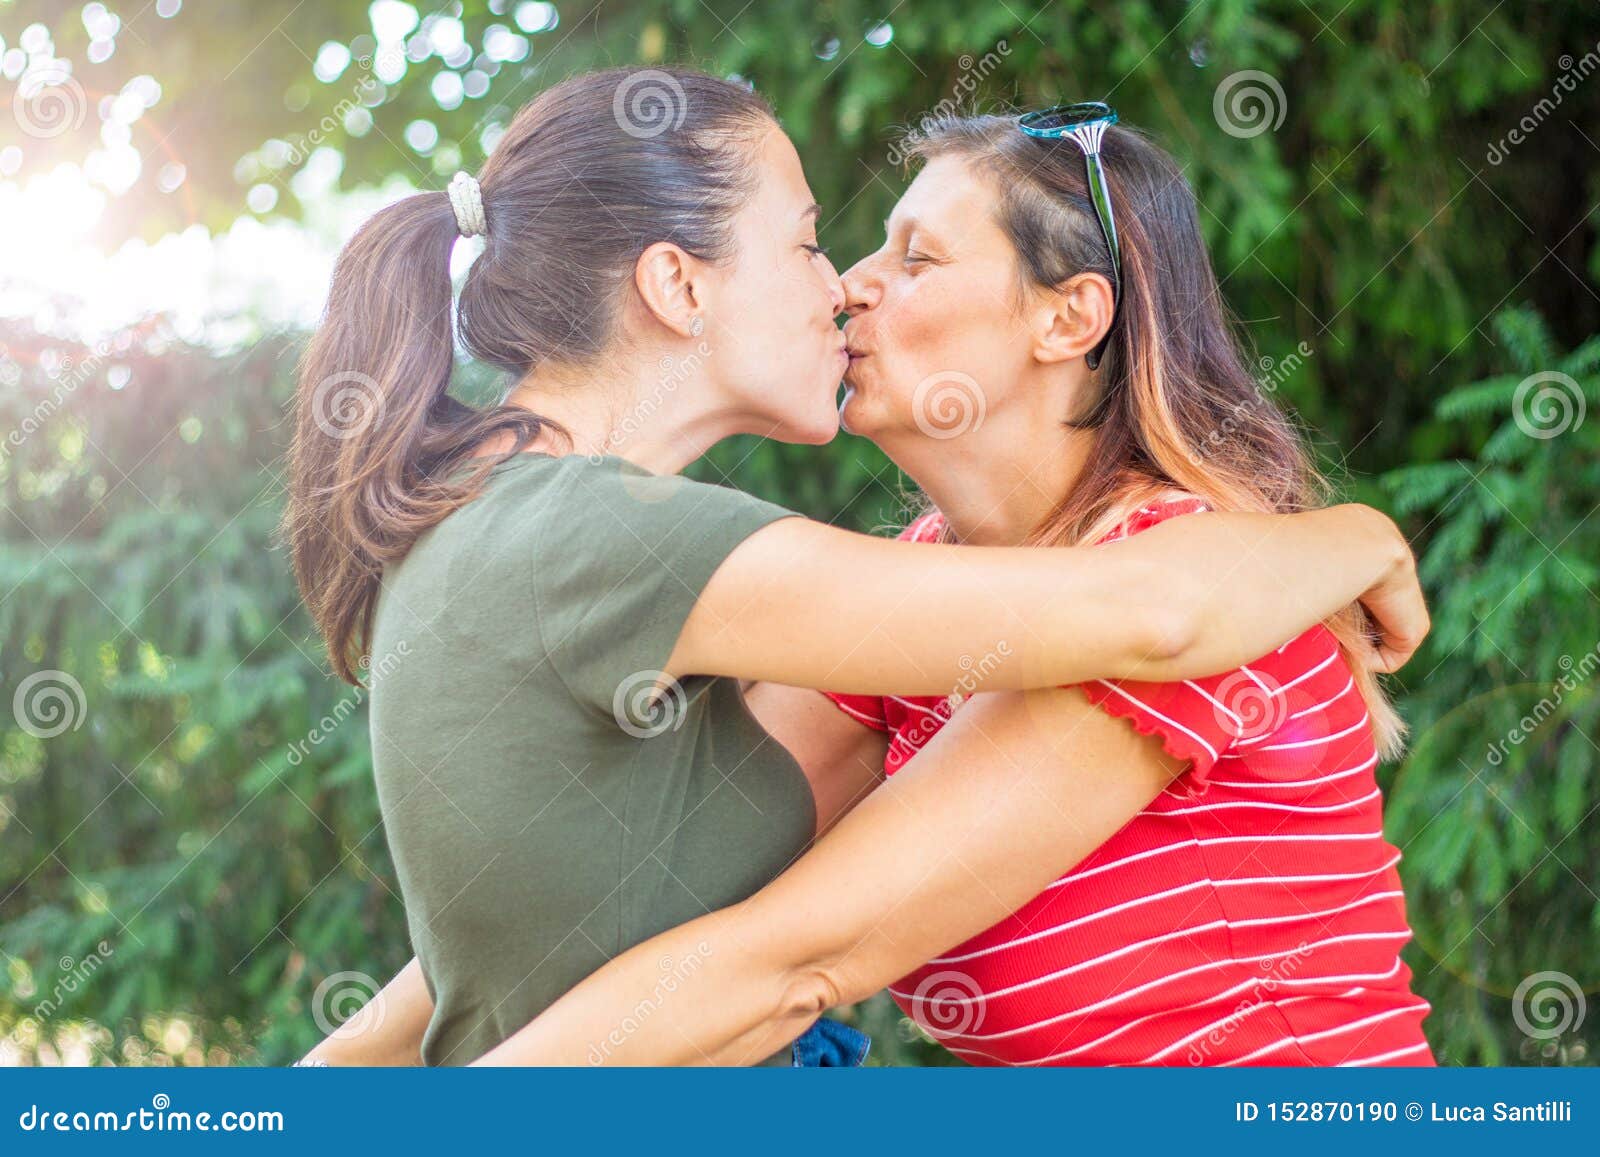 amaka igboekwe recommends Young And Old Lesbian Makeout